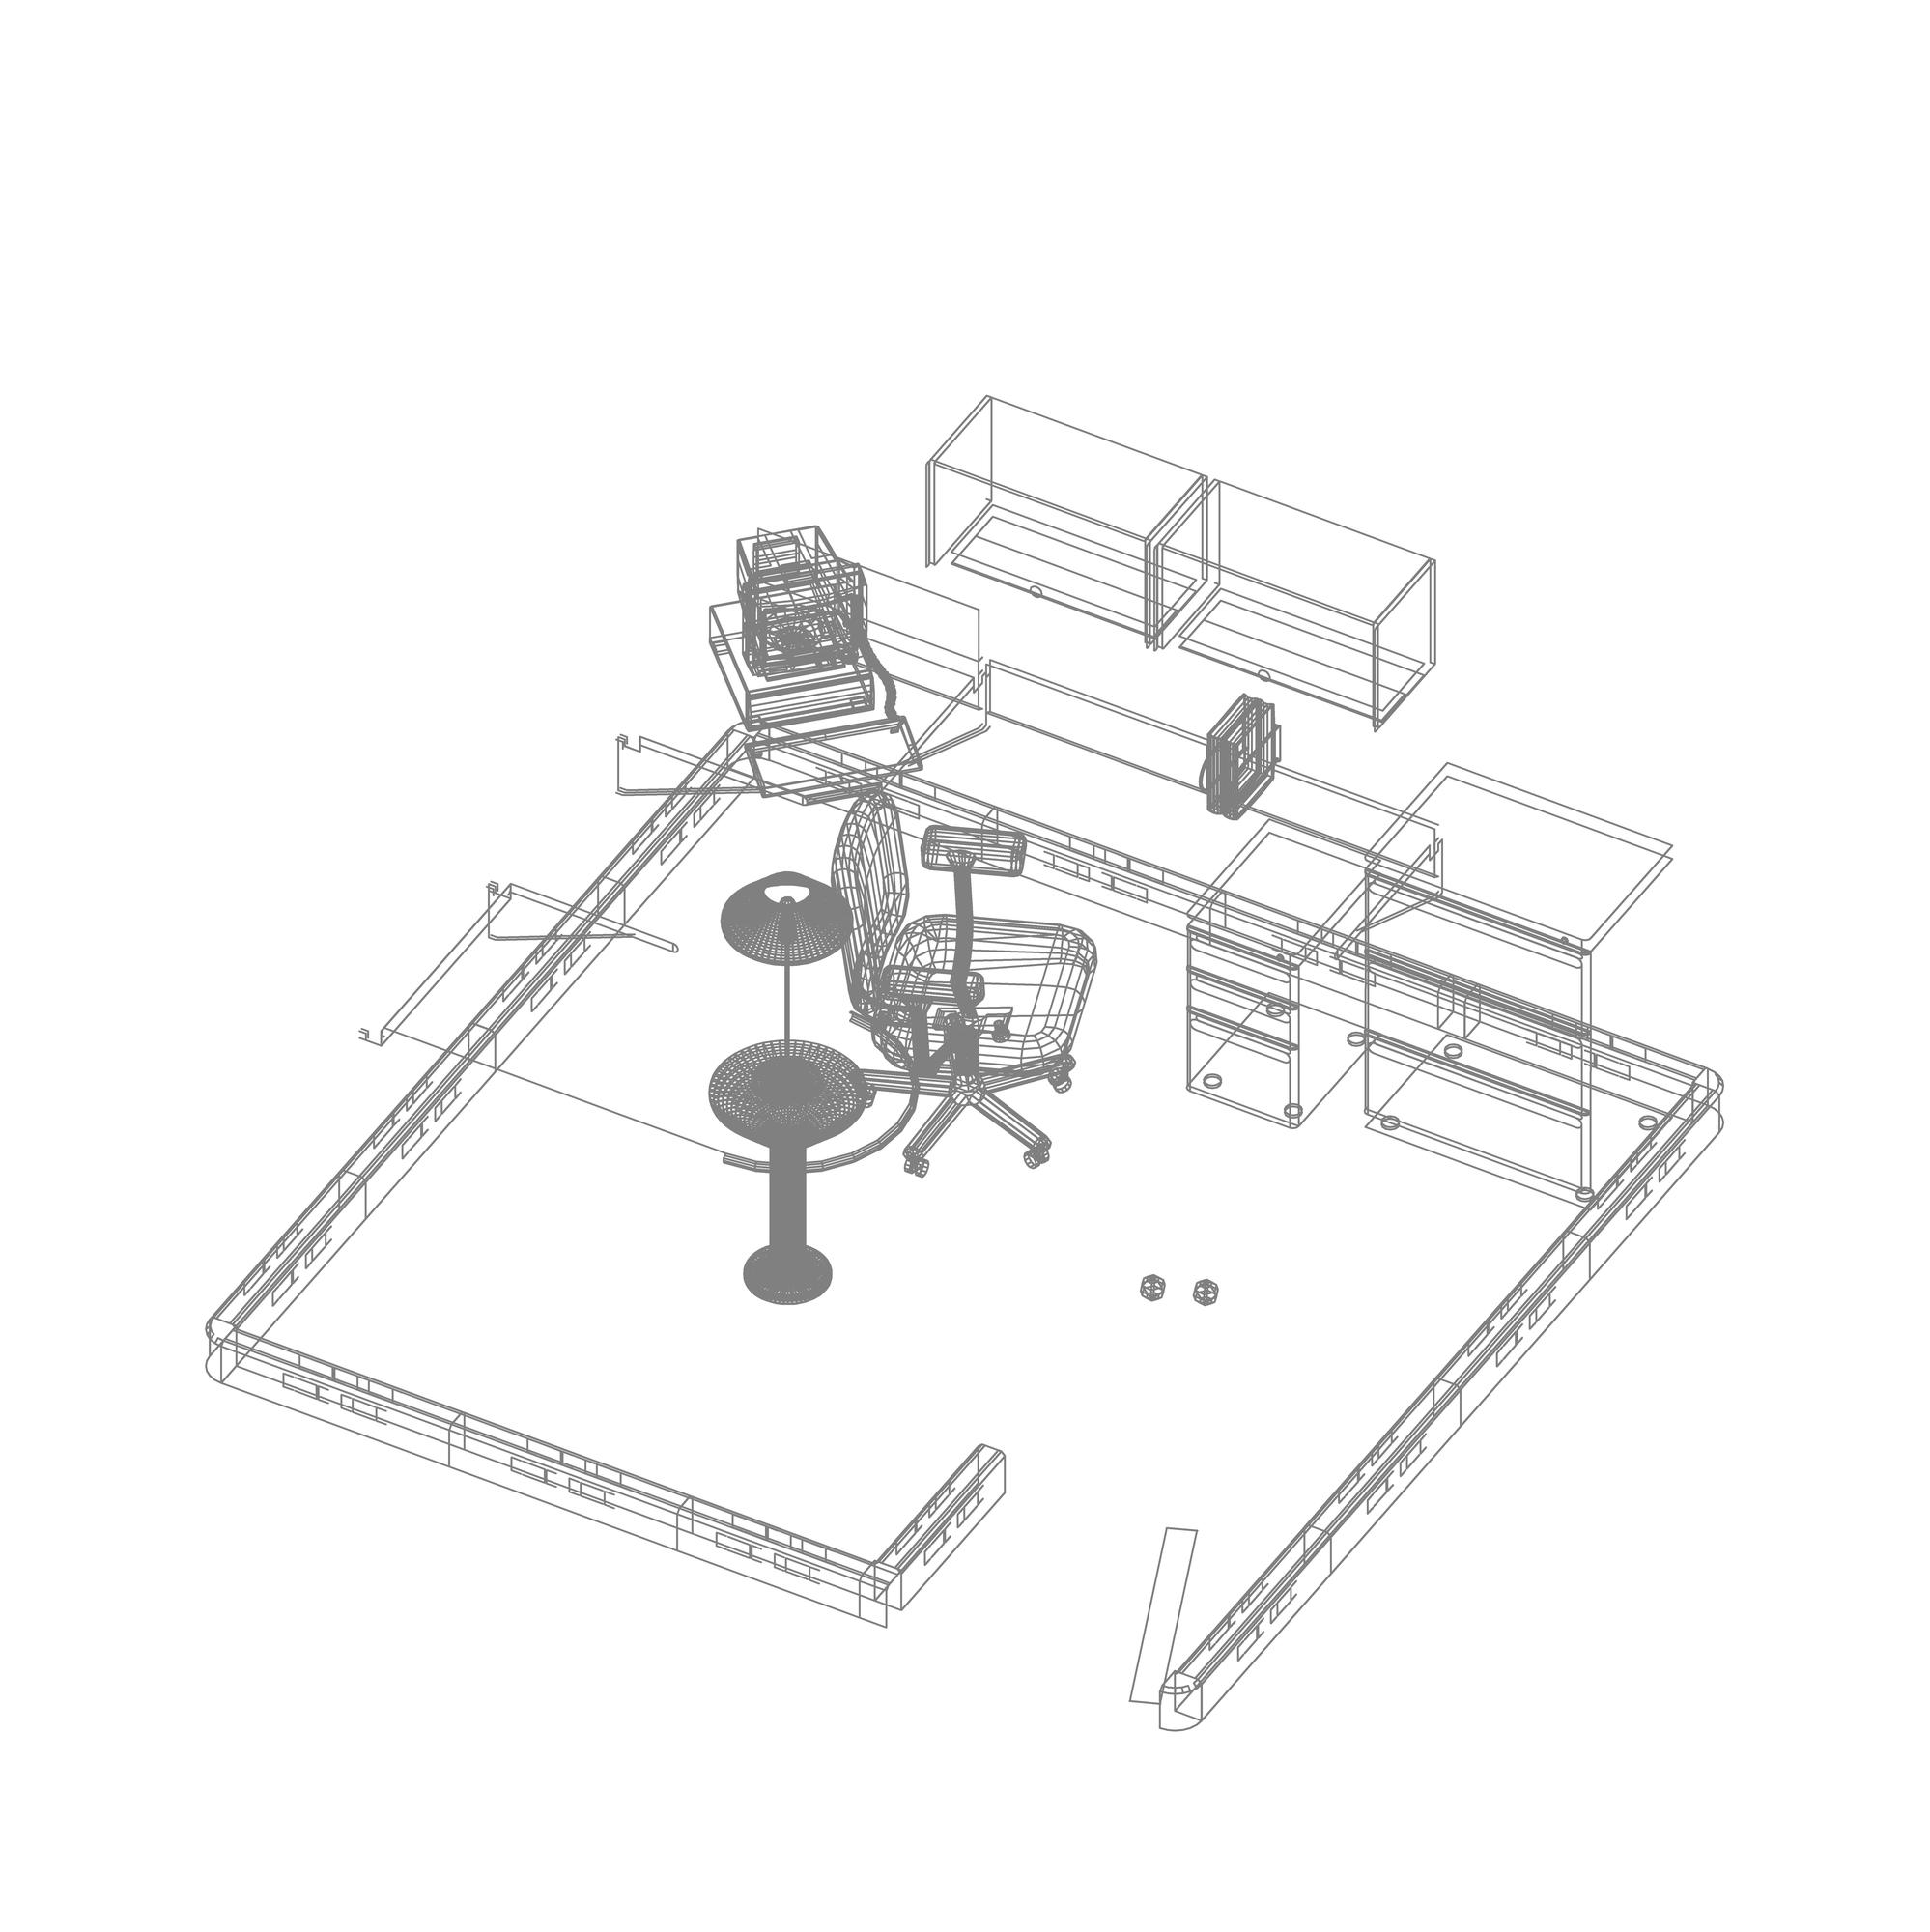 Drawing of an office room in 3d